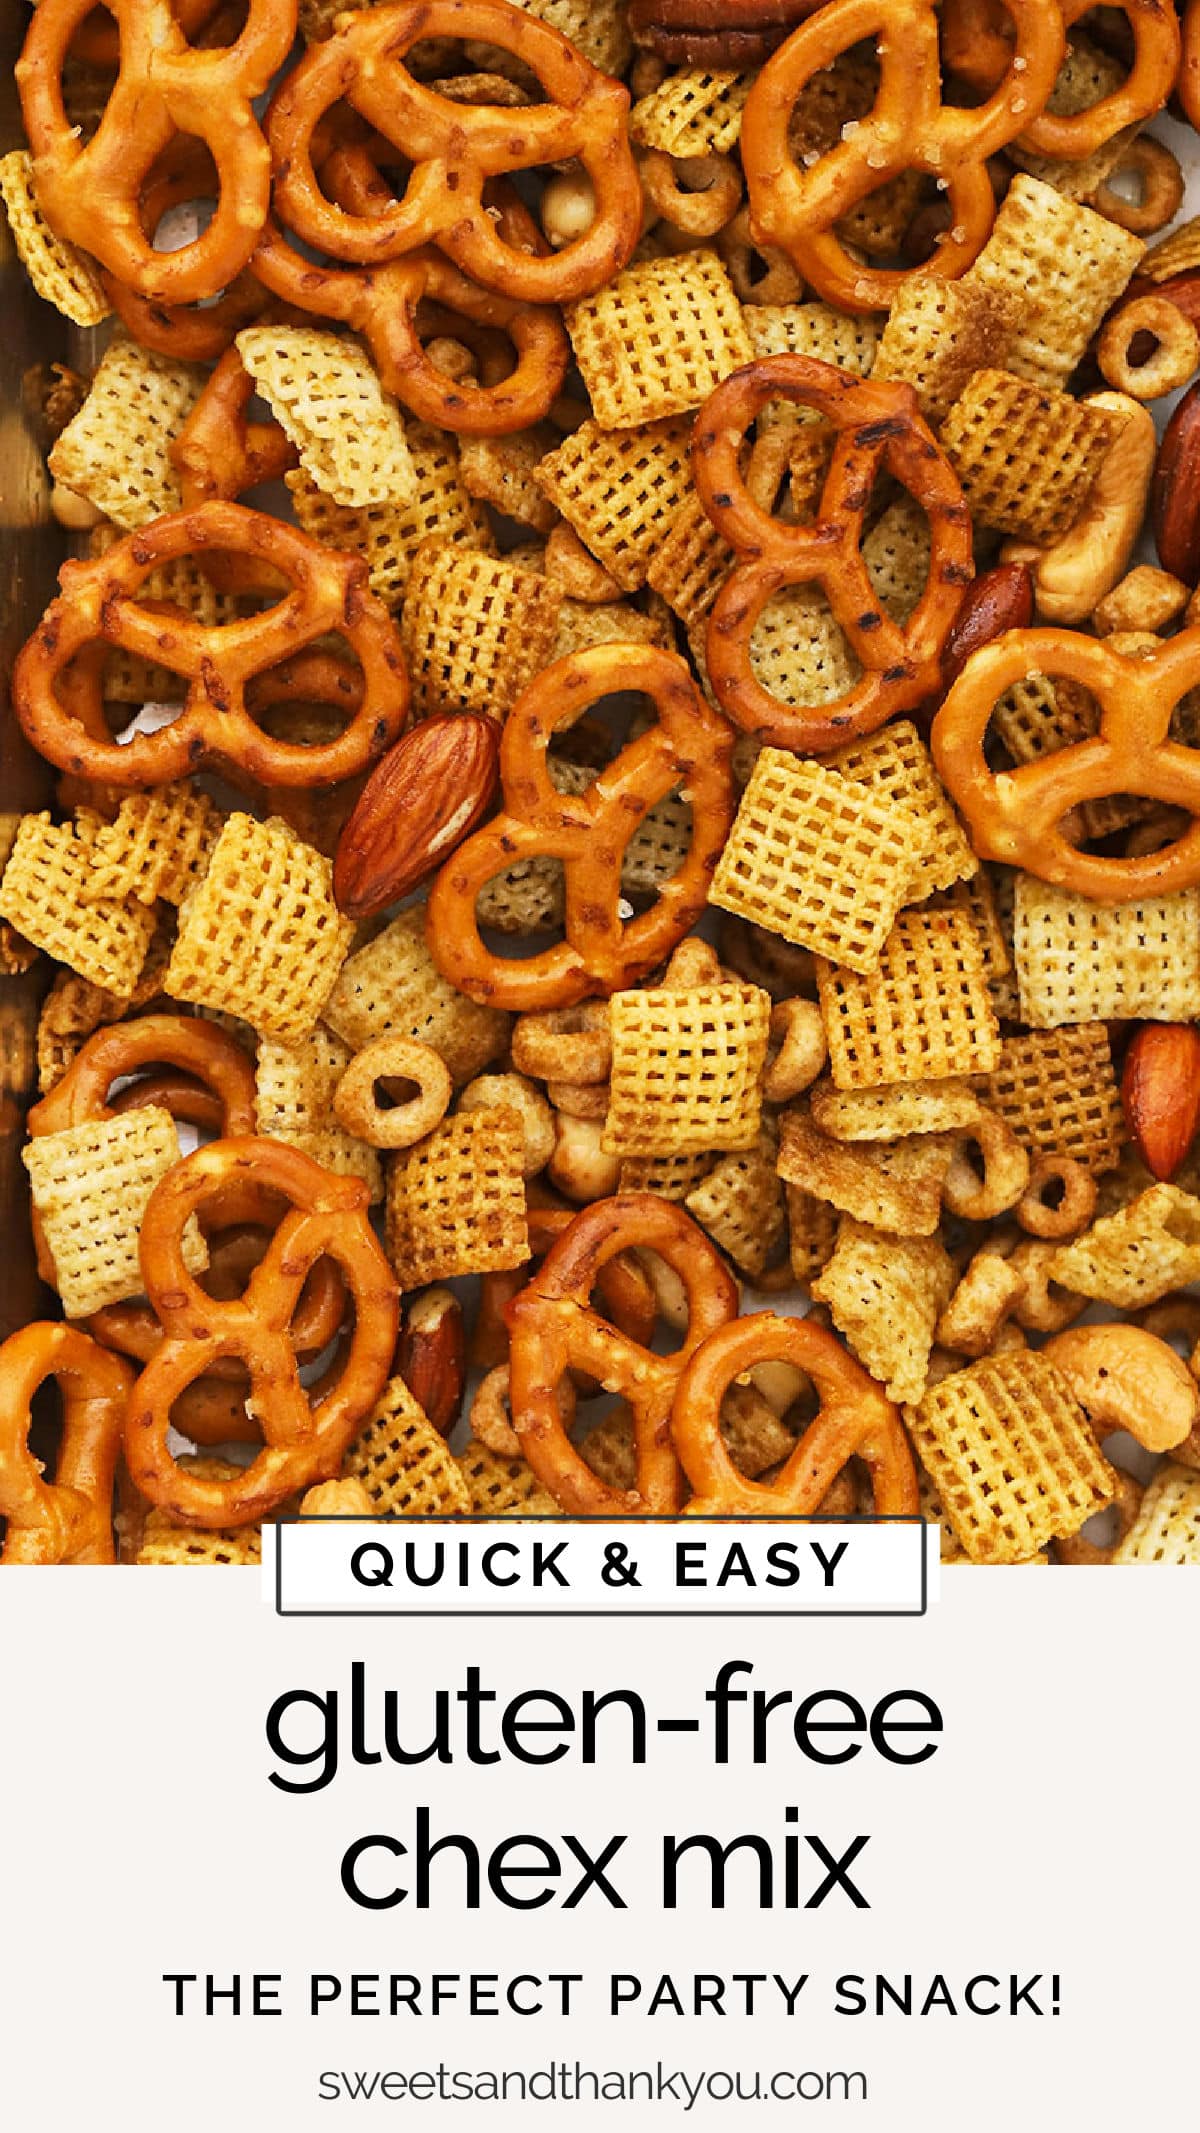 How To Make Gluten-Free Chex Mix  - Our savory gluten-free Chex mix recipe is the perfect party snack! You'll love the crunch & flavor! // gluten-free chex party mix // gluten-free savory chex mix // gluten-free party mix // gluten-free Chex Mix for a party / gluten-free party snacks // gluten-free snack recipe